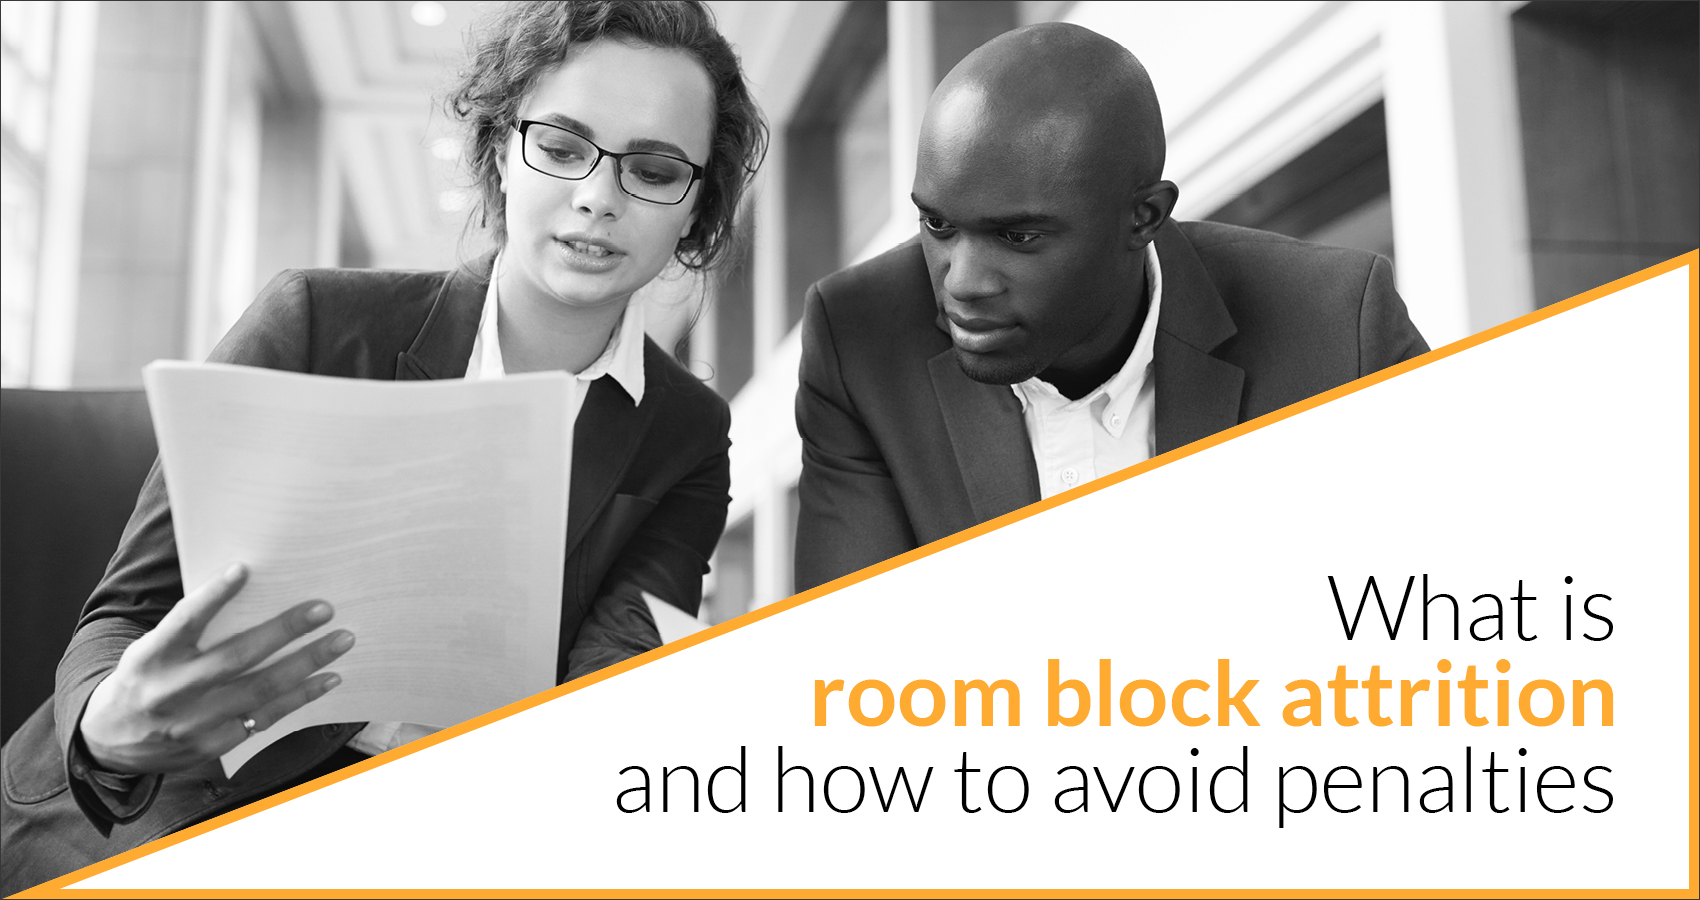 What is room block attrition and how to avoid penalties